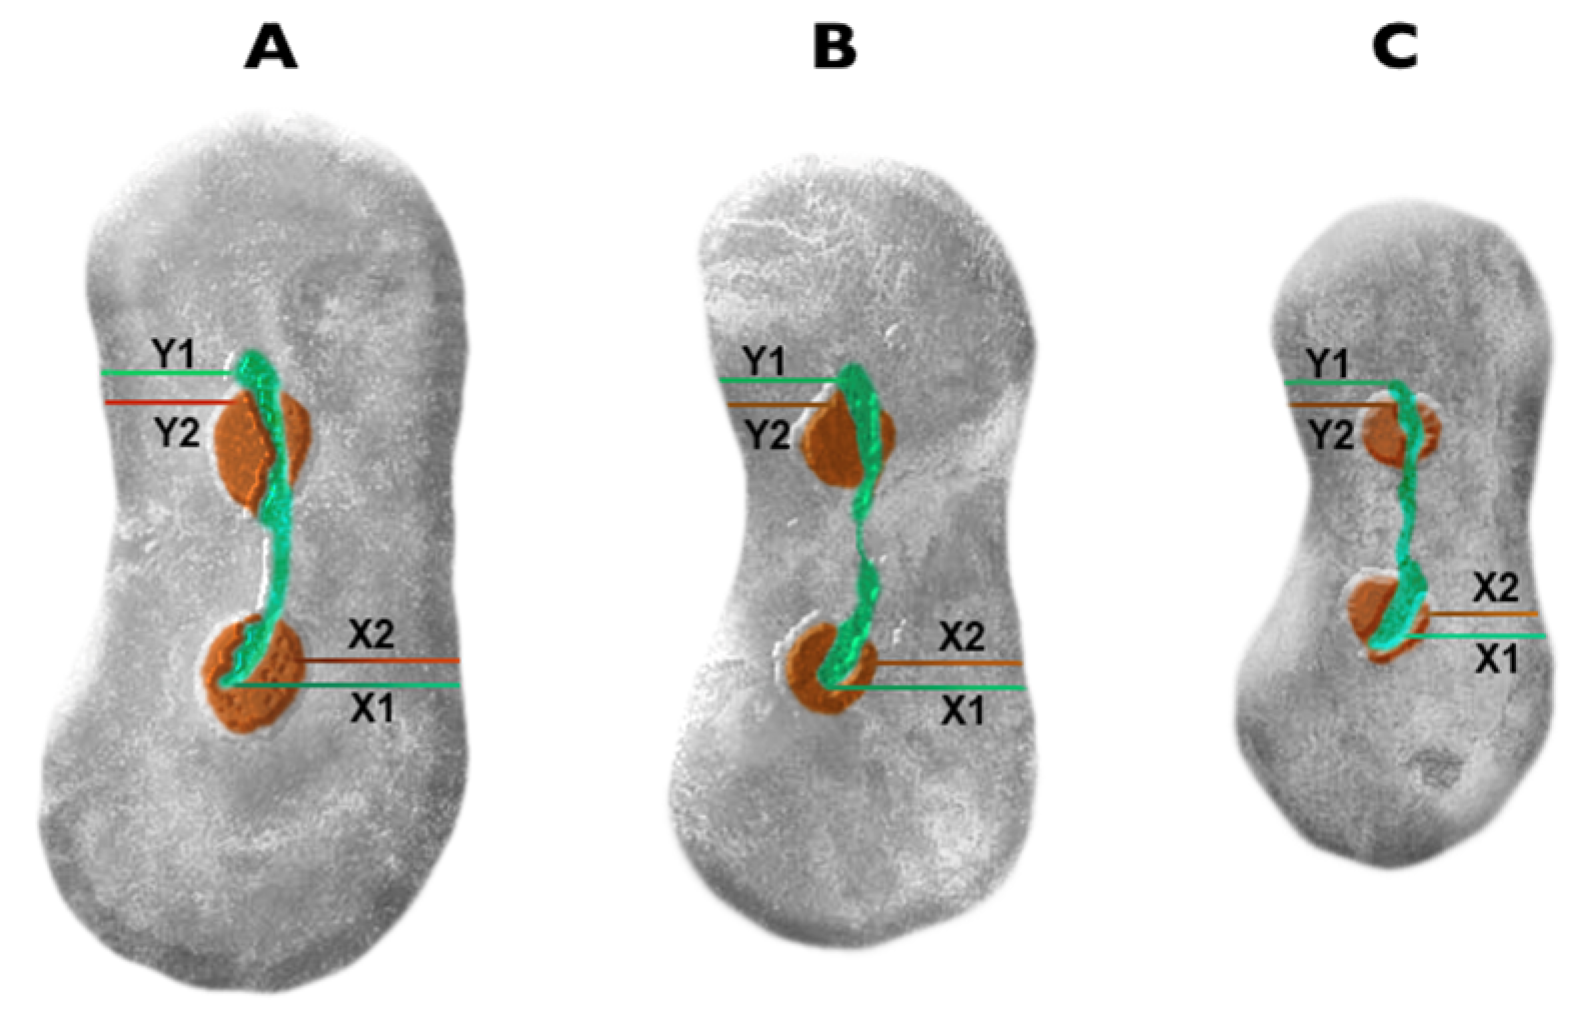 3D reconstructions showing microcracks in the mesial roots of